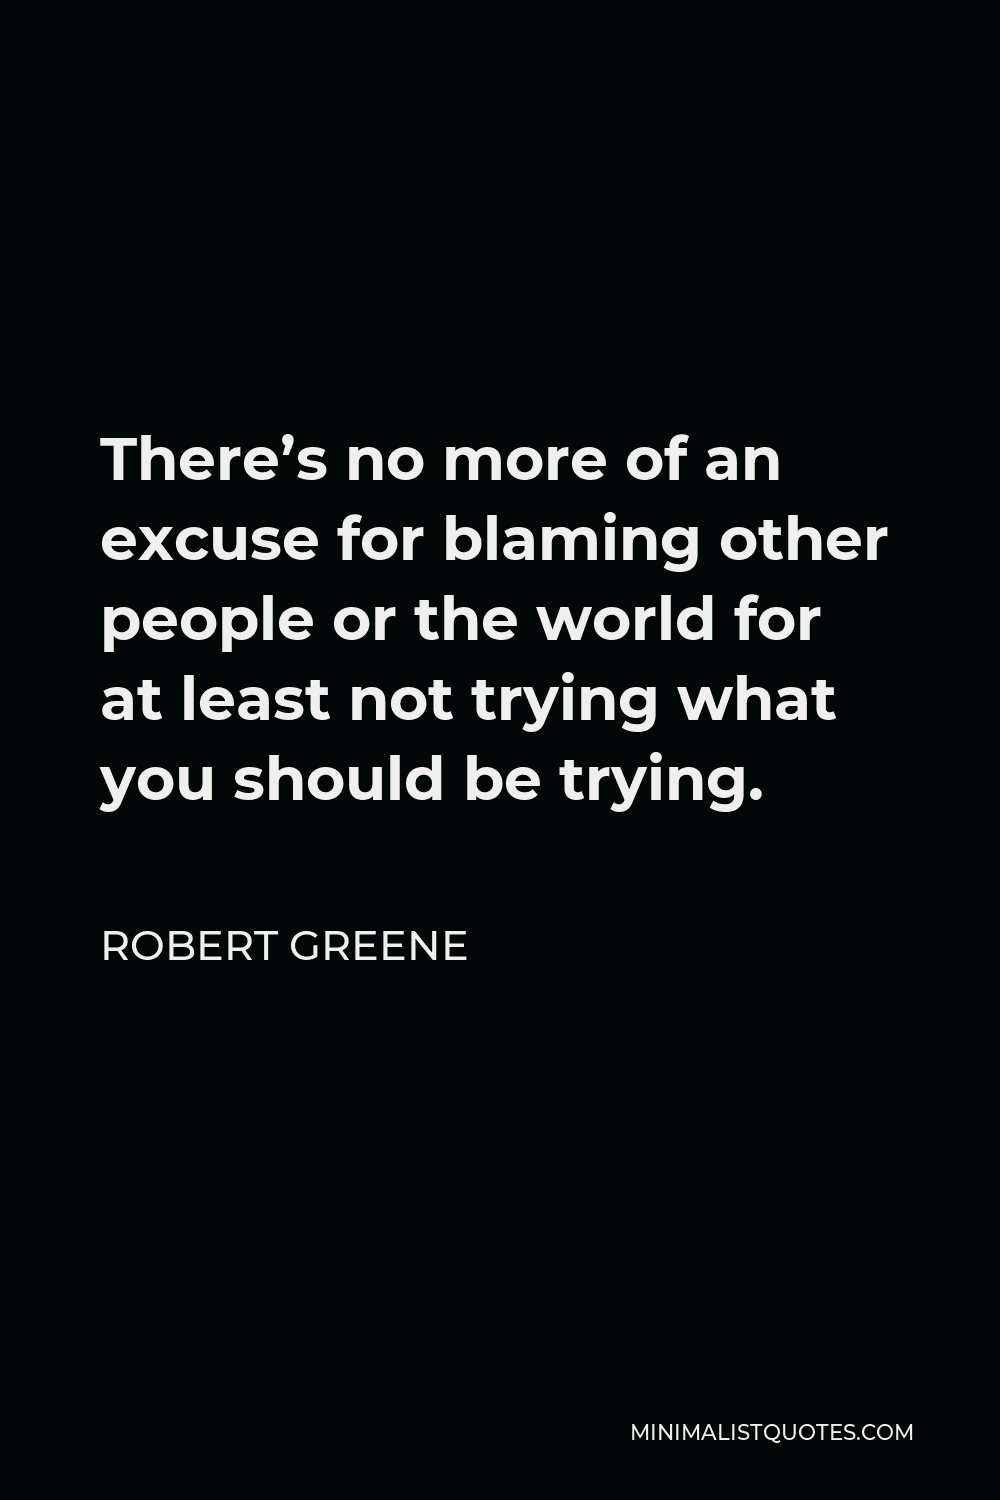 Robert Greene Quote - There’s no more of an excuse for blaming other people or the world for at least not trying what you should be trying.